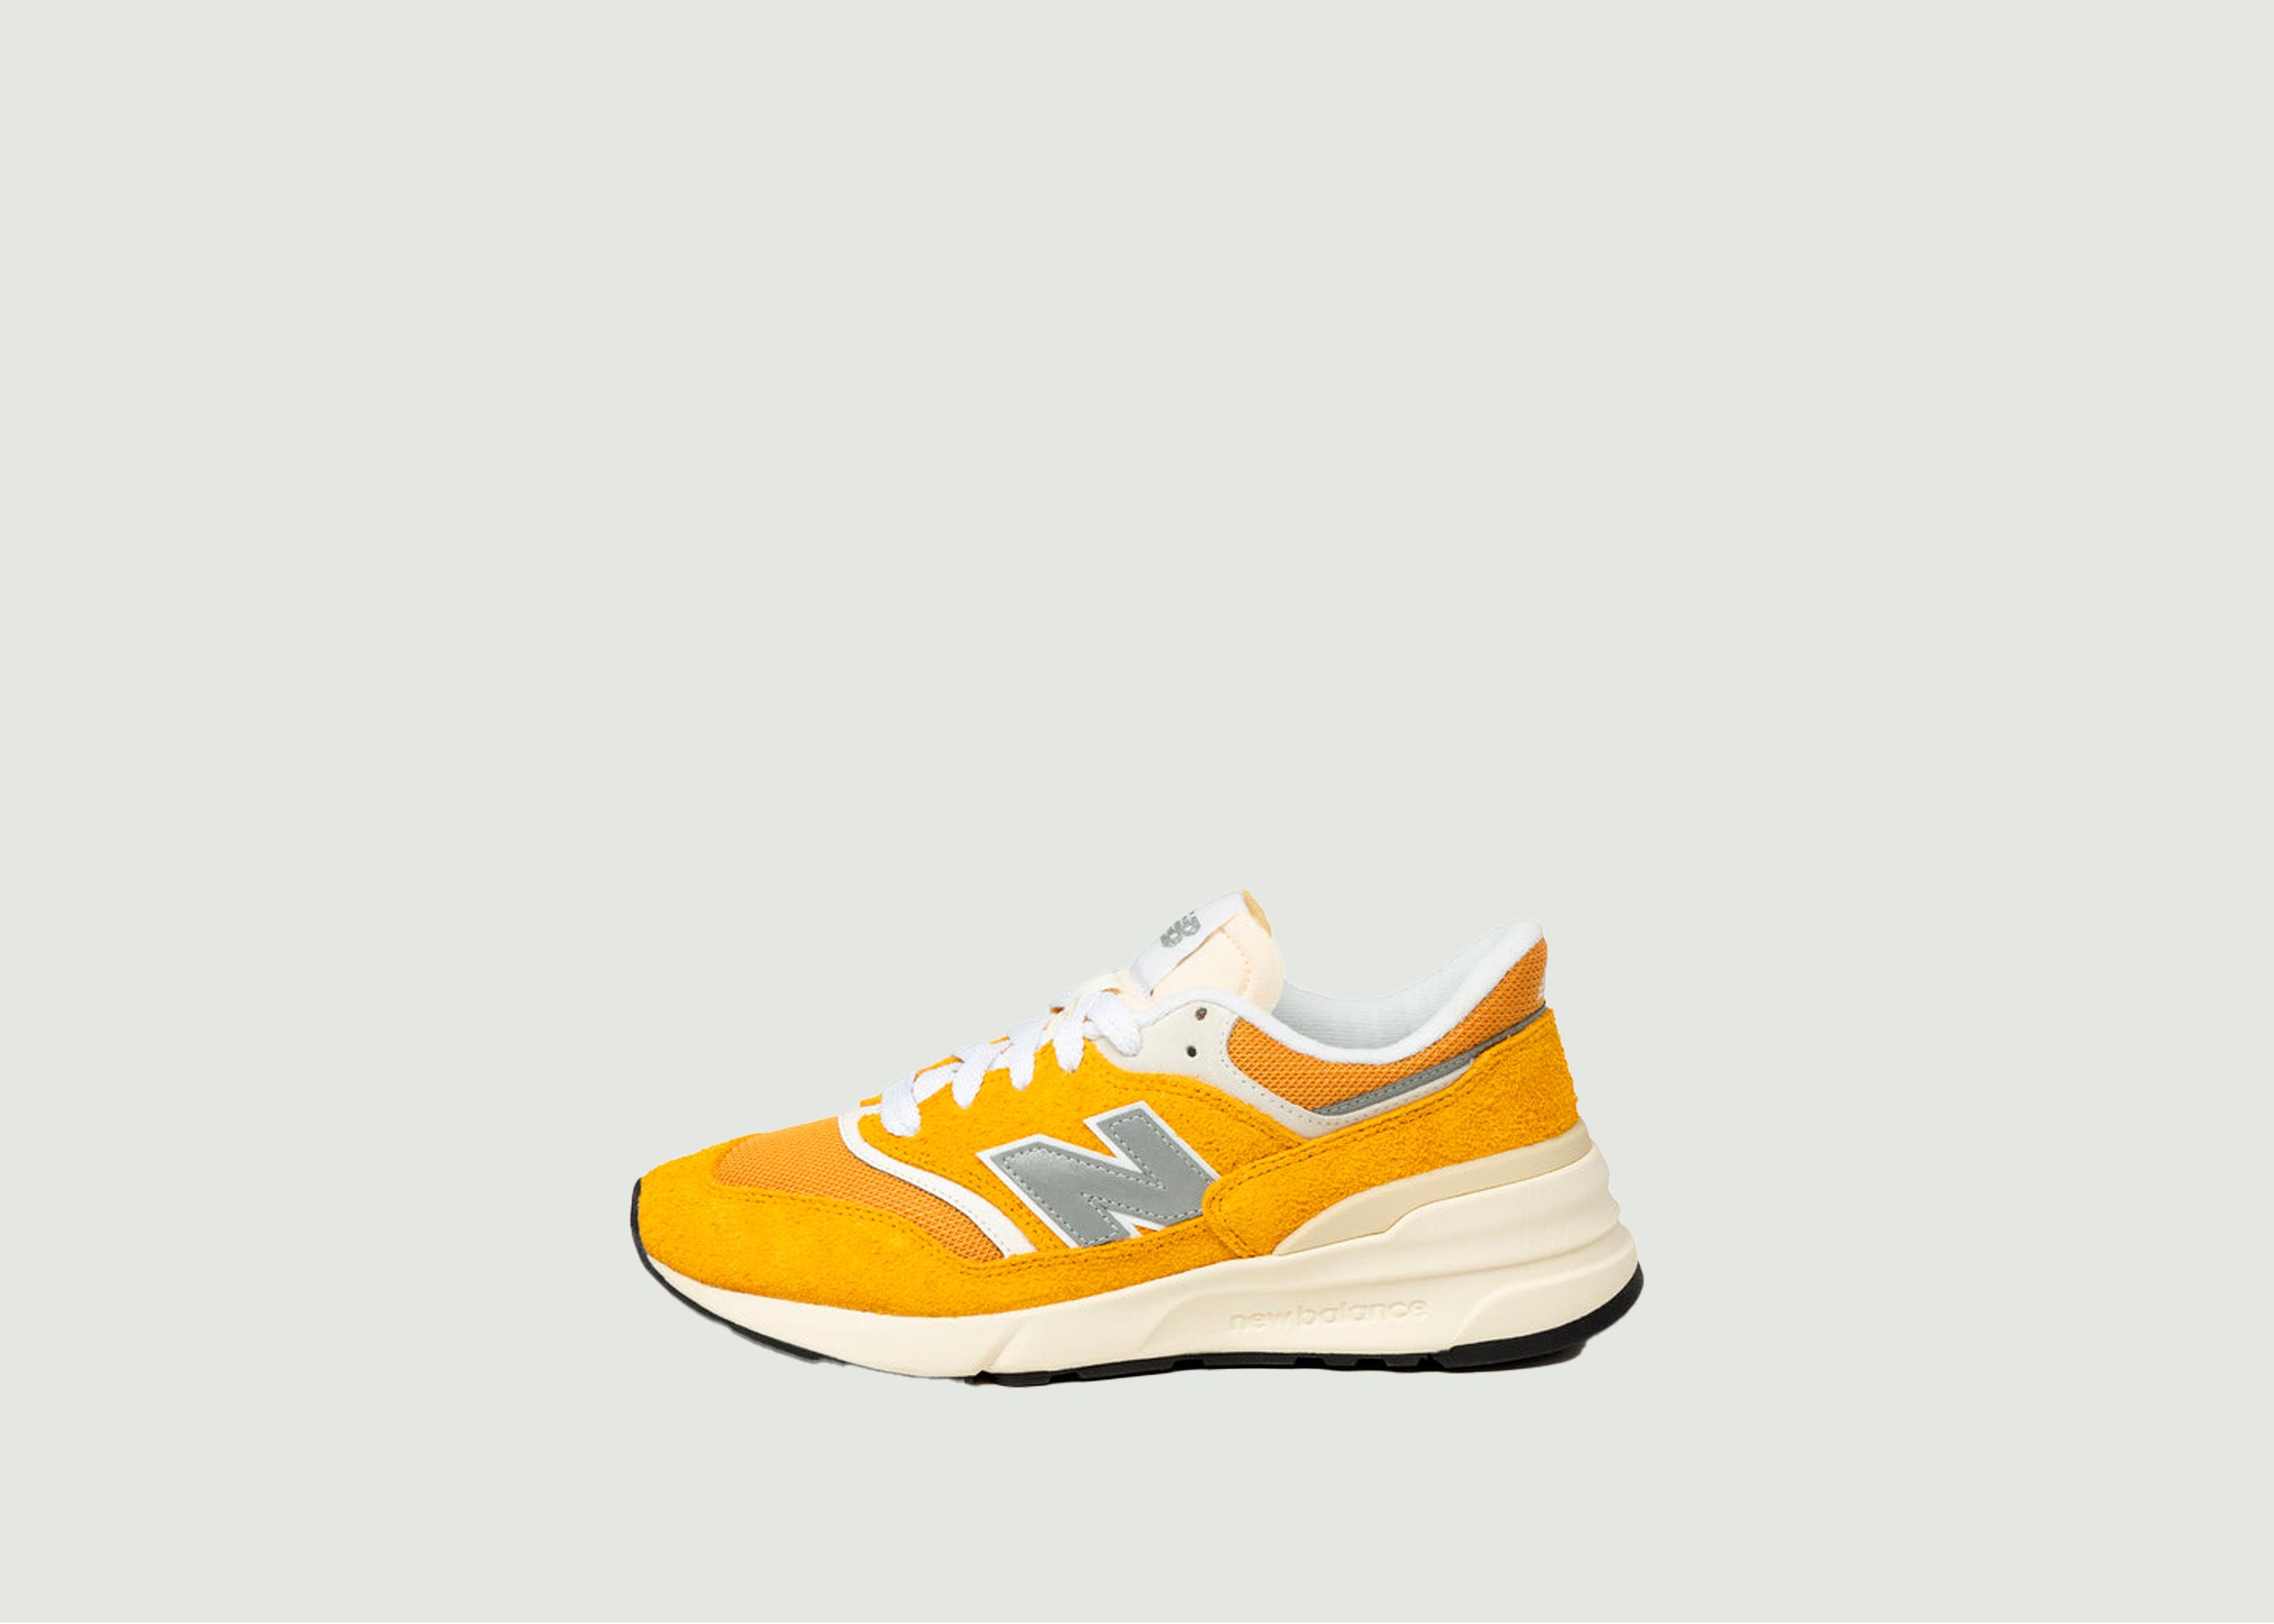 Sneakers 997 - New Balance